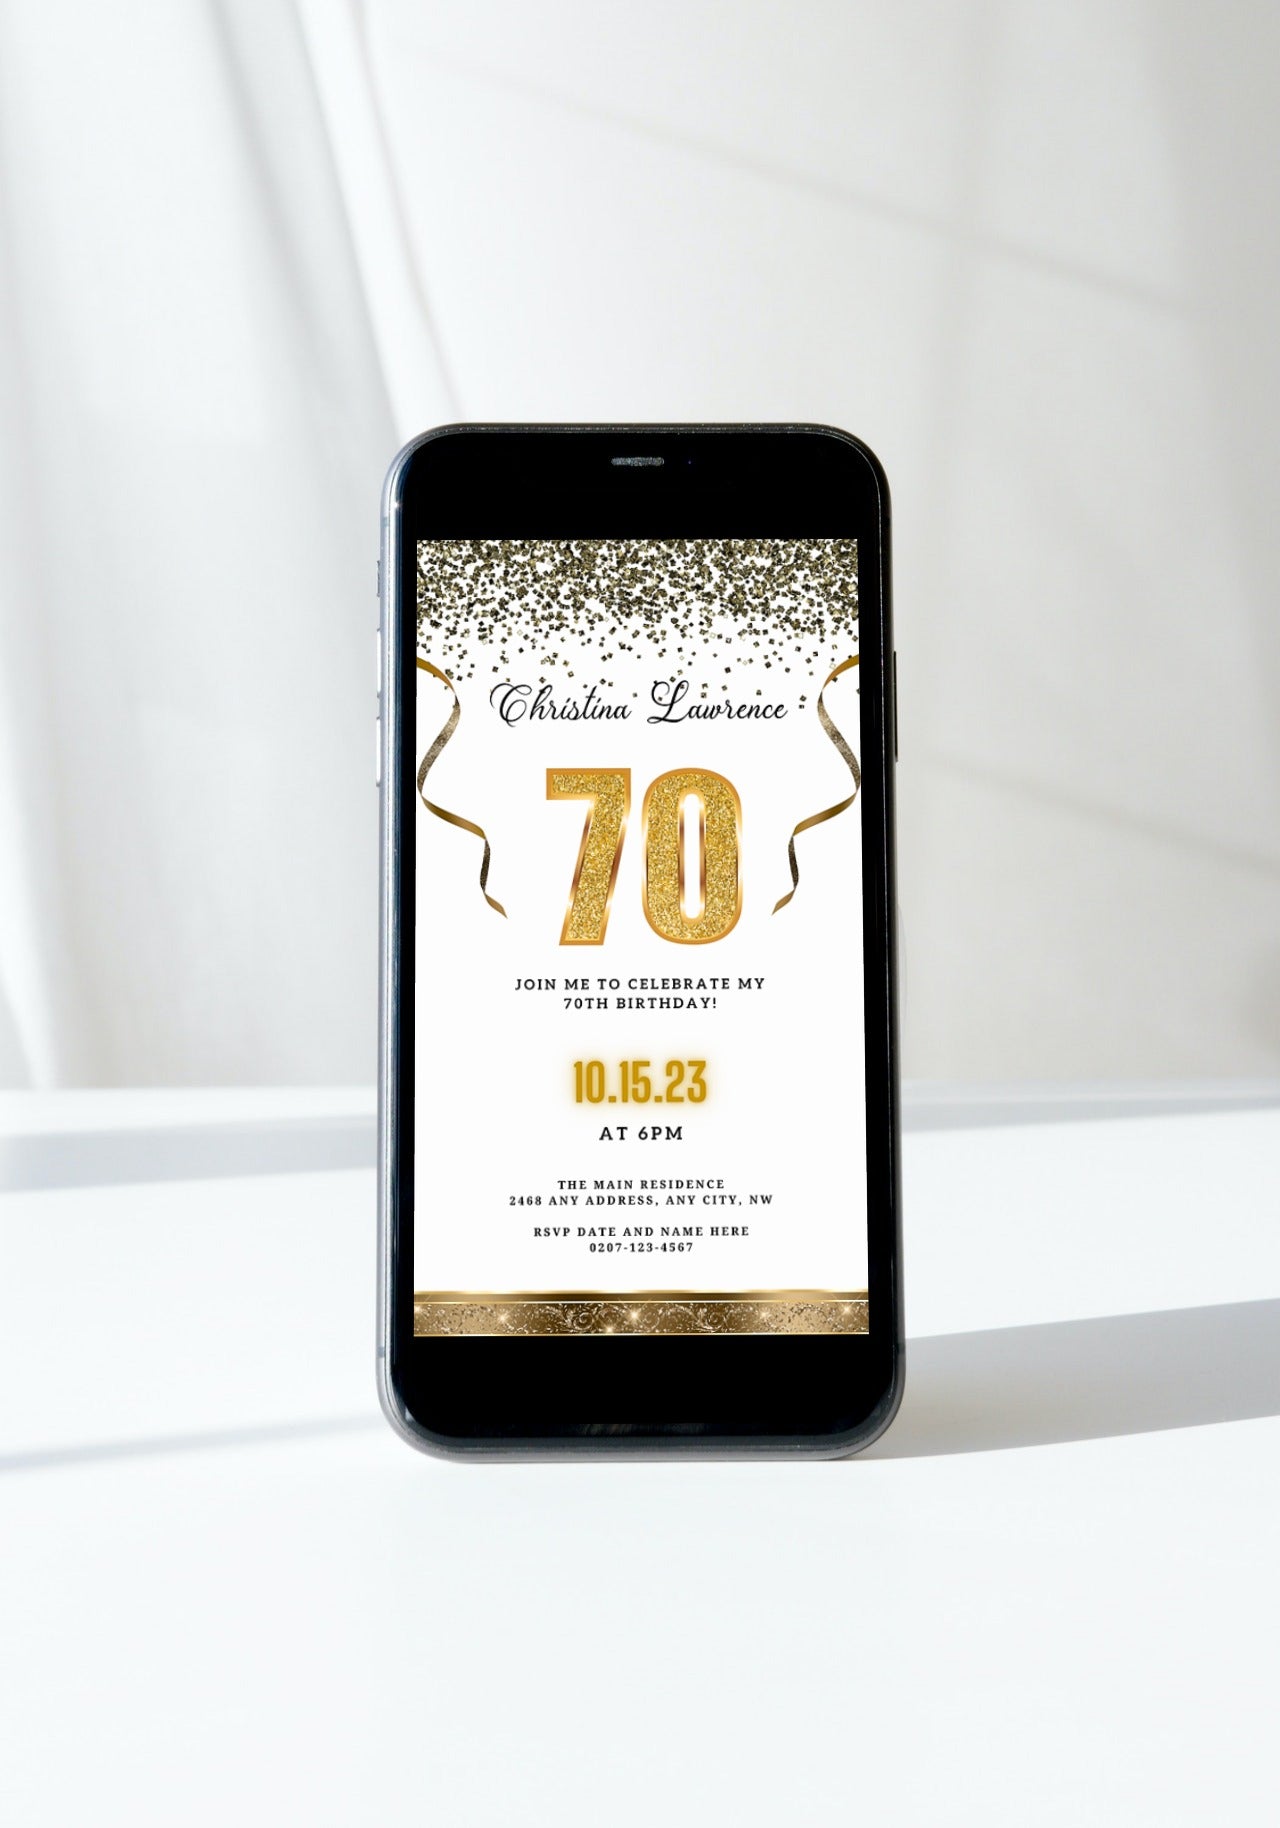 Customizable Digital White Gold Confetti 70th Birthday Evite displayed on a smartphone, featuring editable text and design elements for easy personalization using Canva.